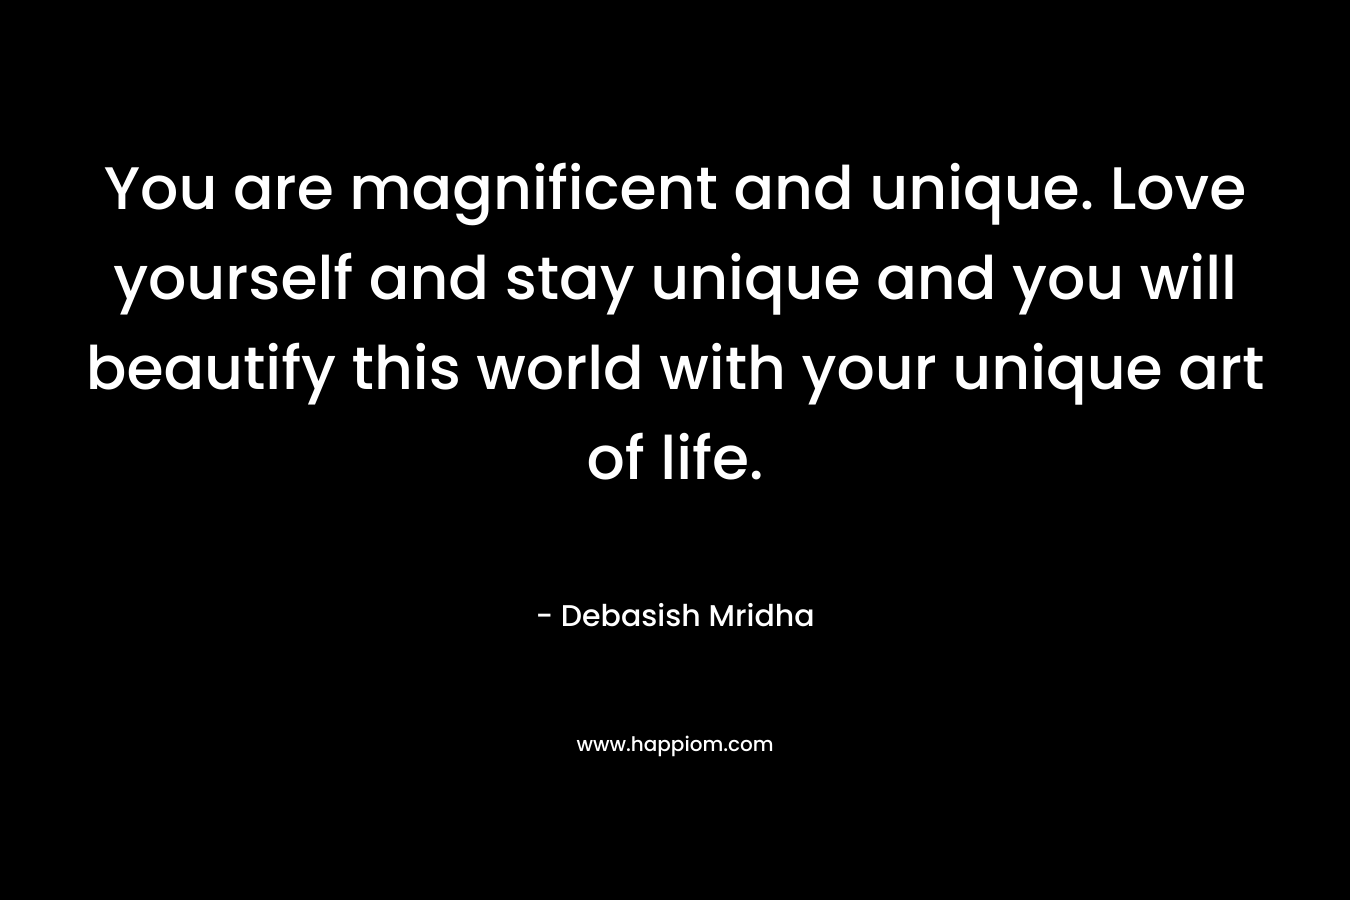 You are magnificent and unique. Love yourself and stay unique and you will beautify this world with your unique art of life.